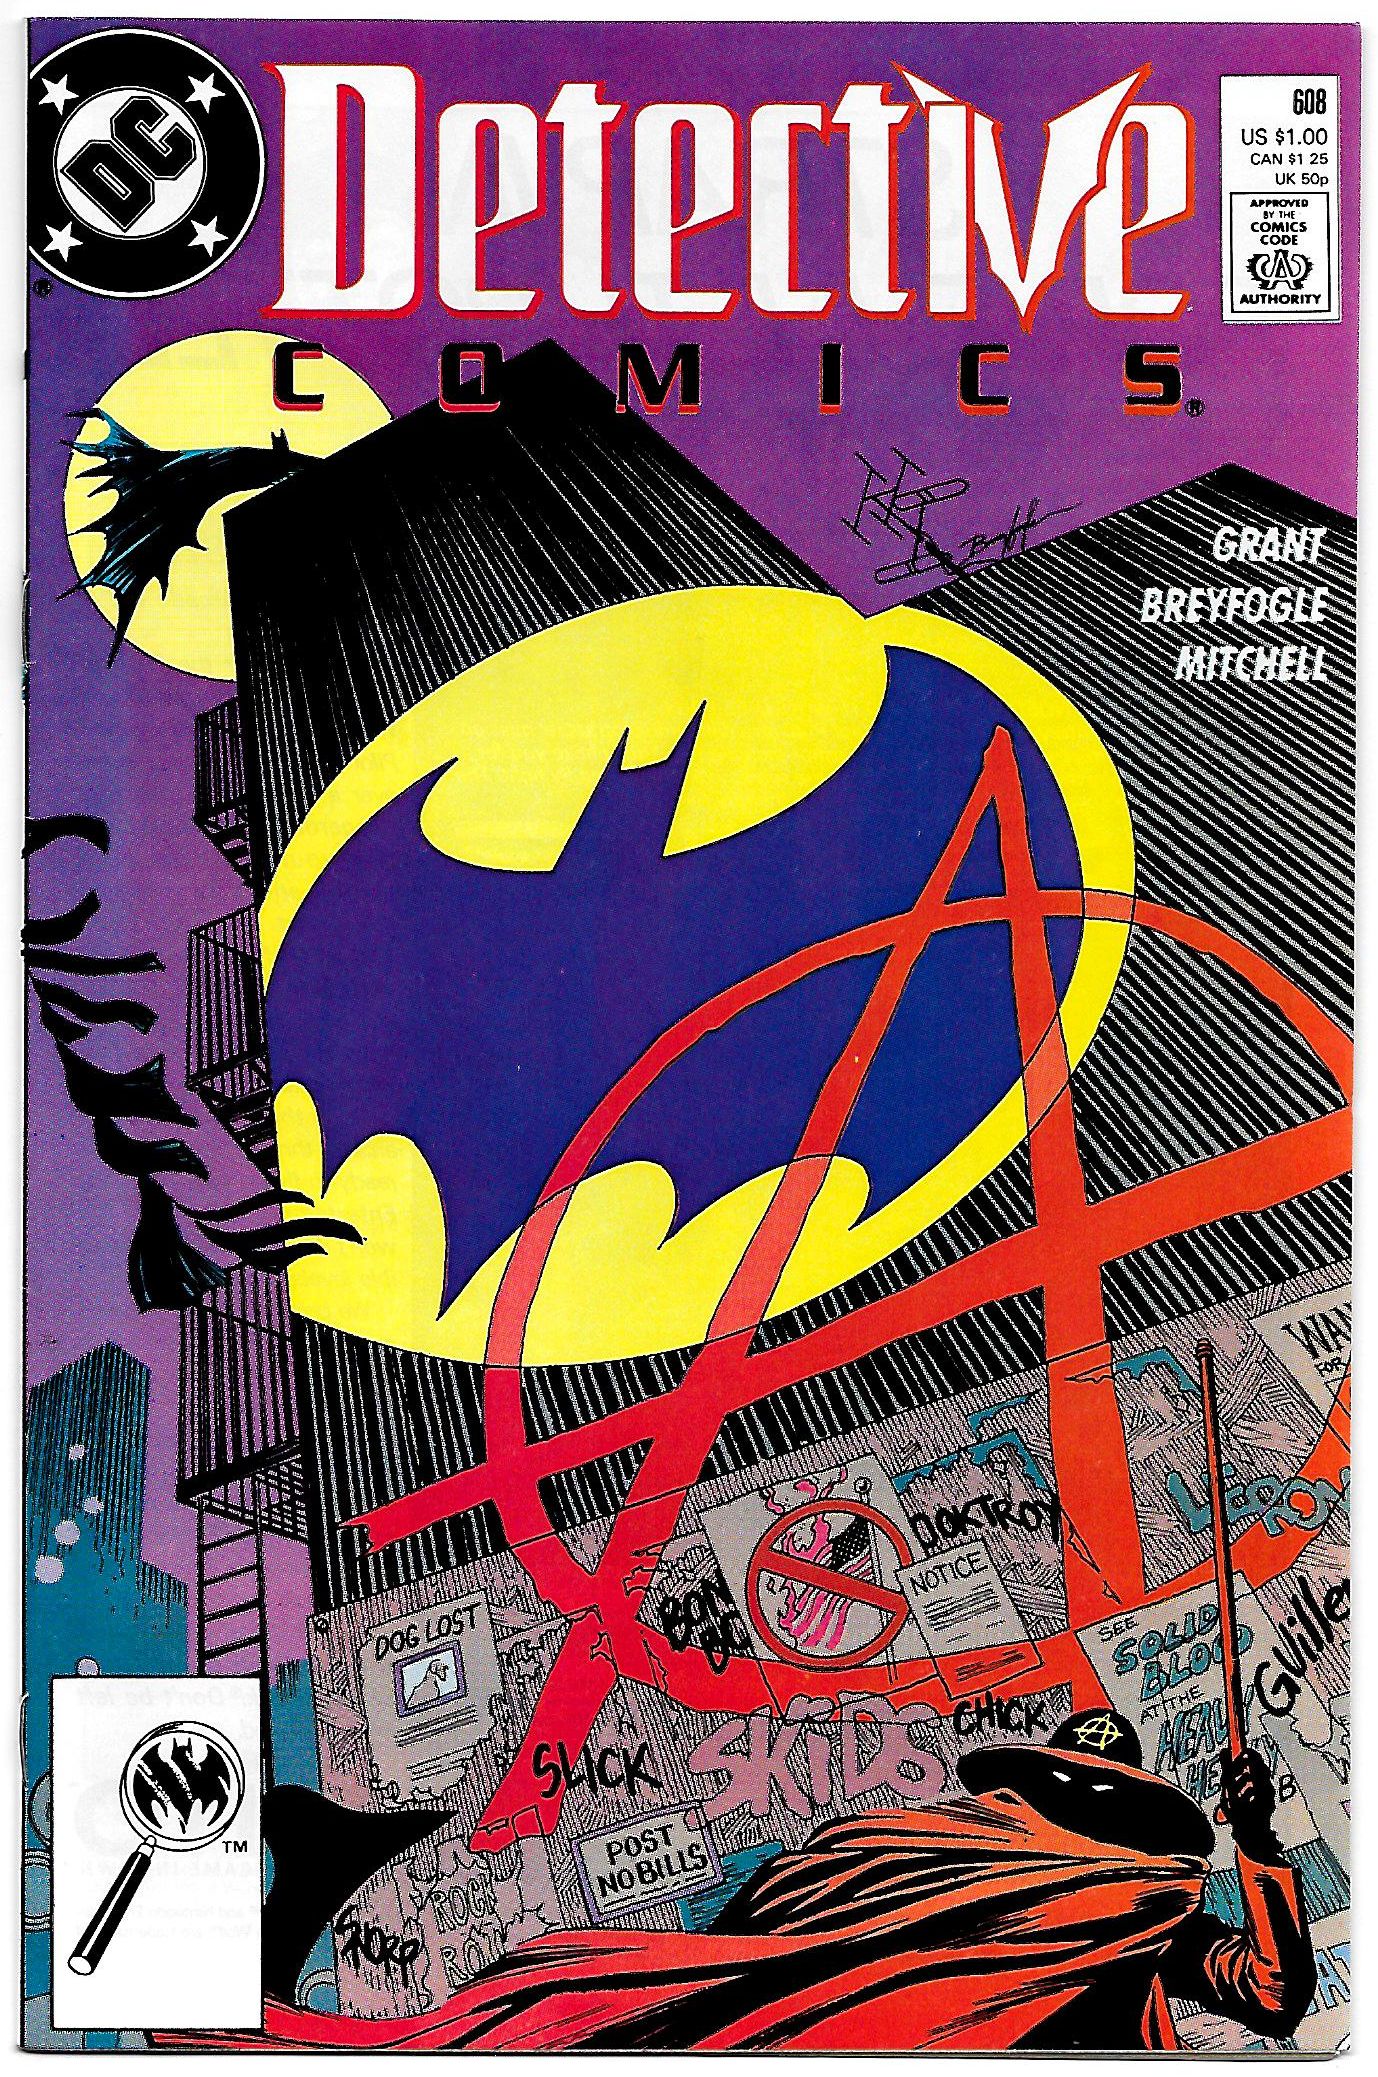 The cover of Detective Comics #608, one of Norm Breyfogle's favourites on the book